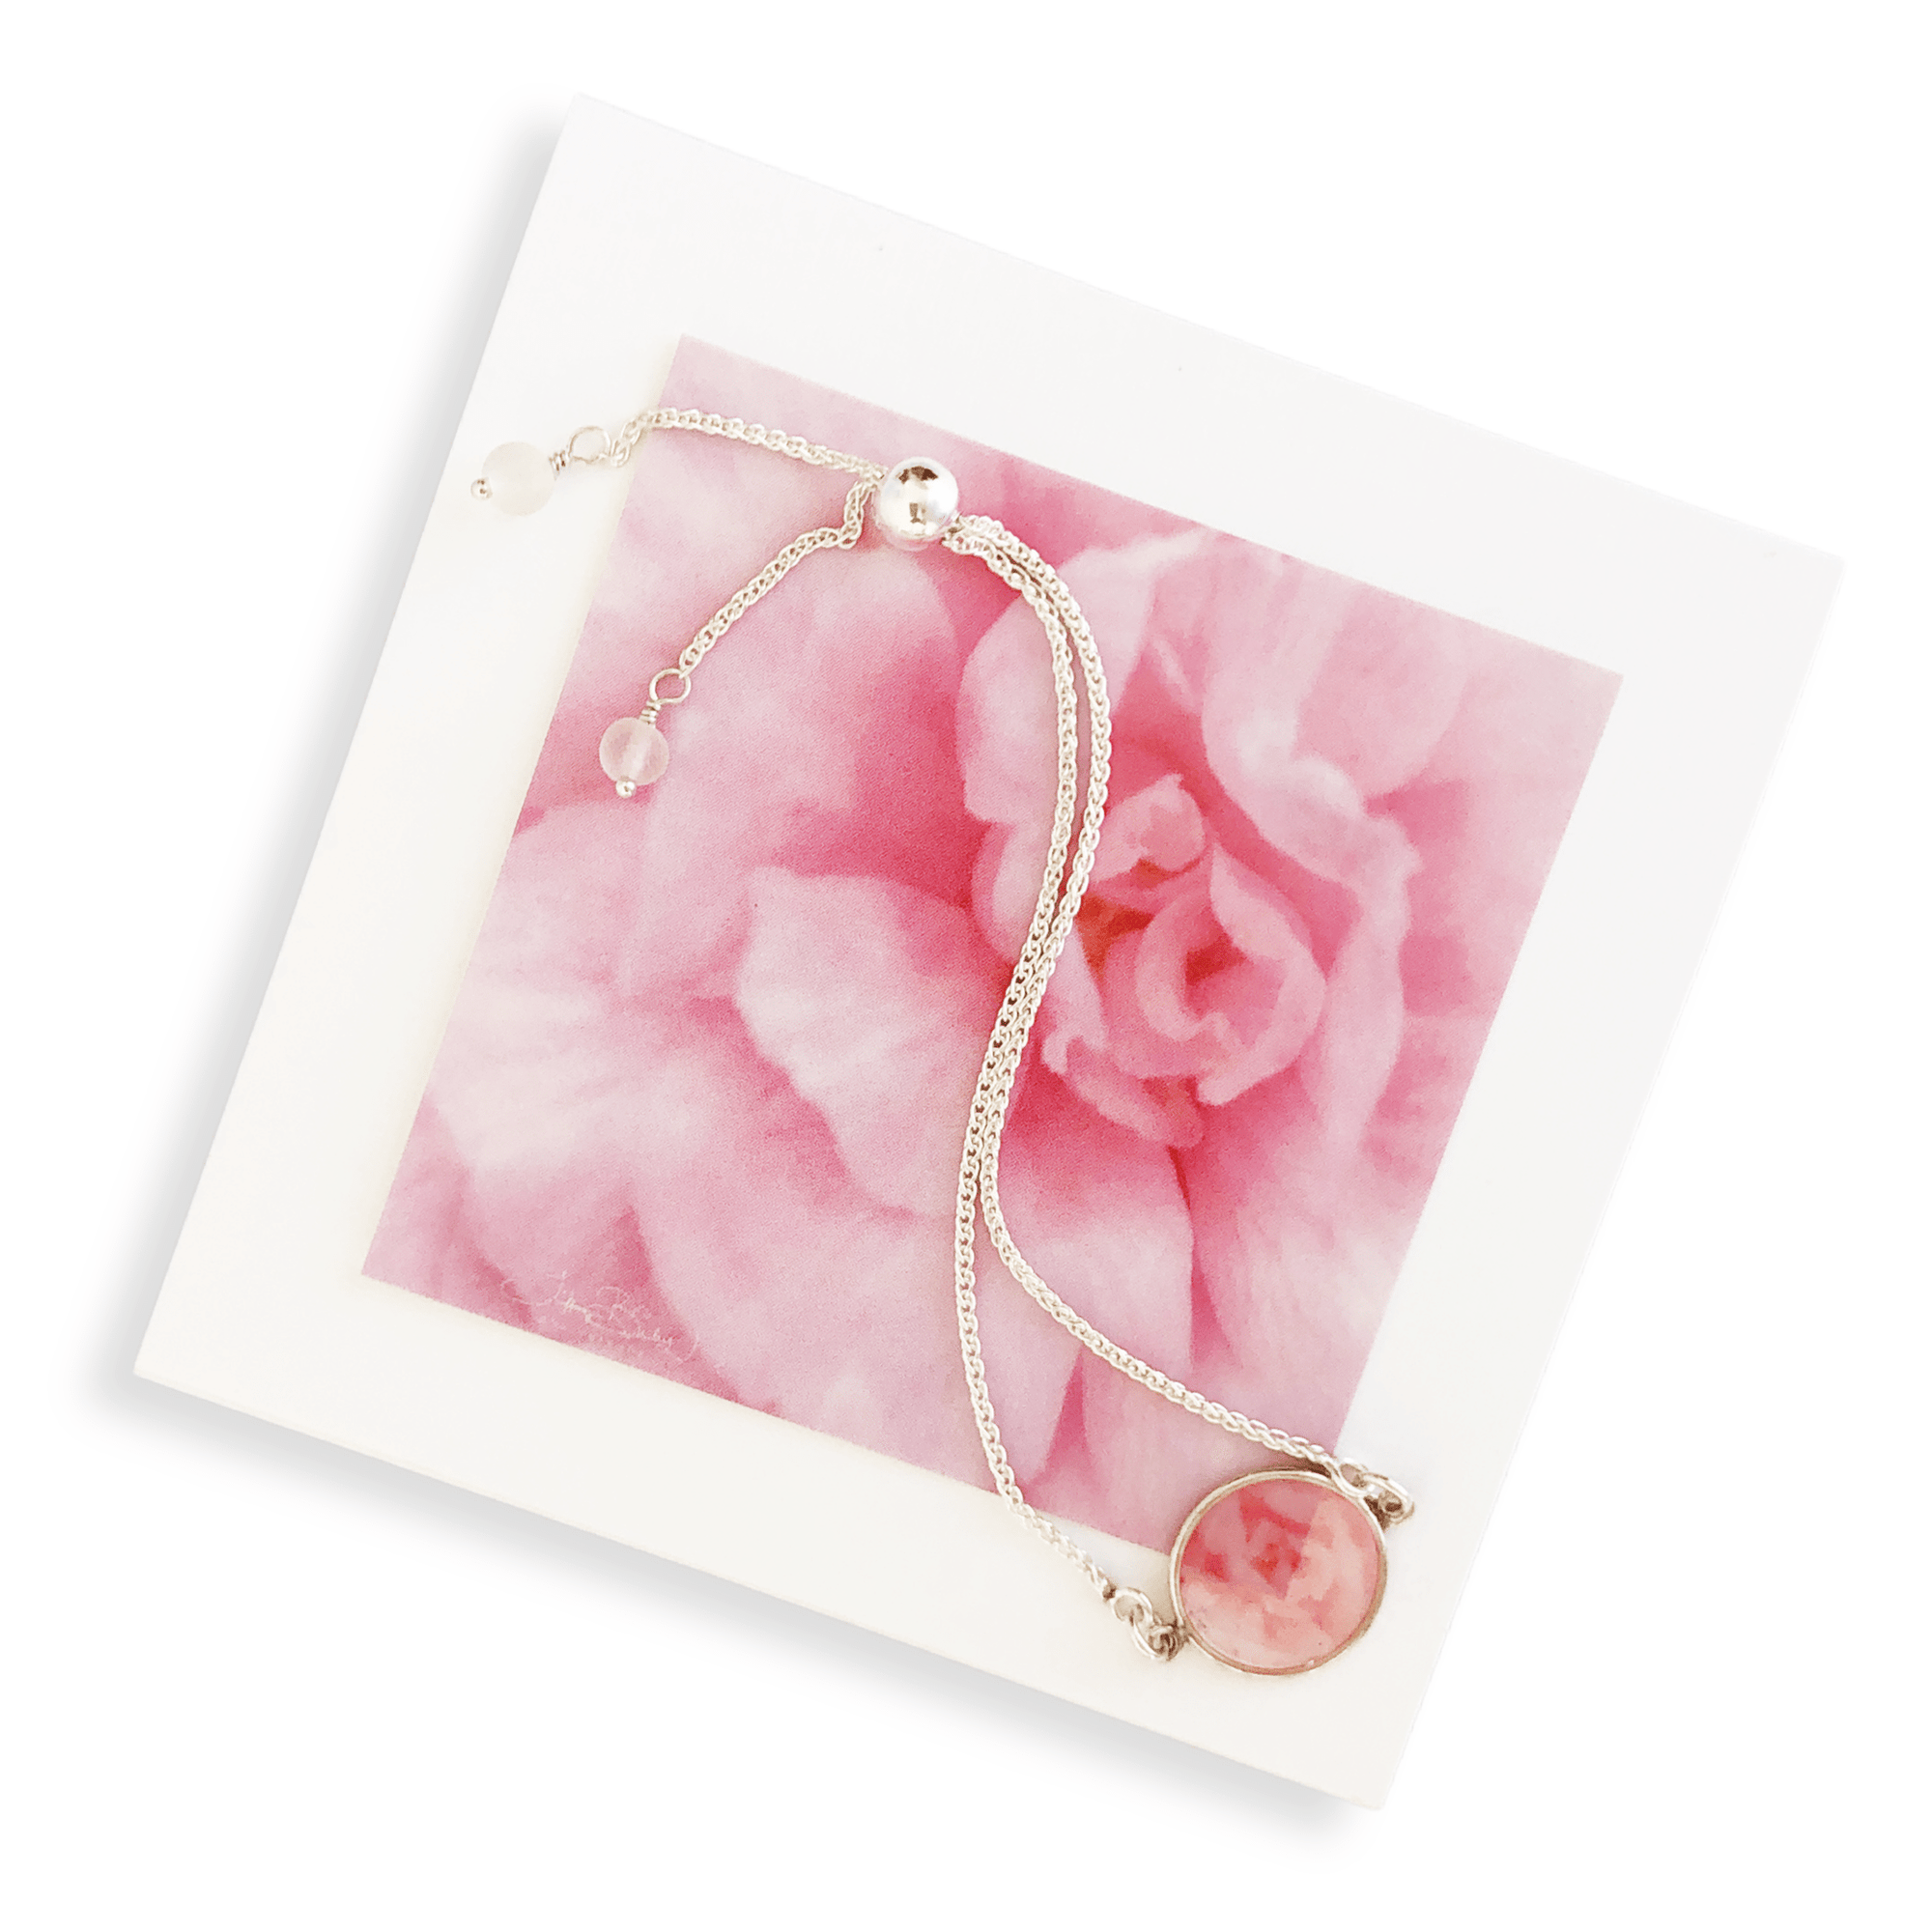 Pink Rose Bracelet by Tiffany Briley | A Quest For Light